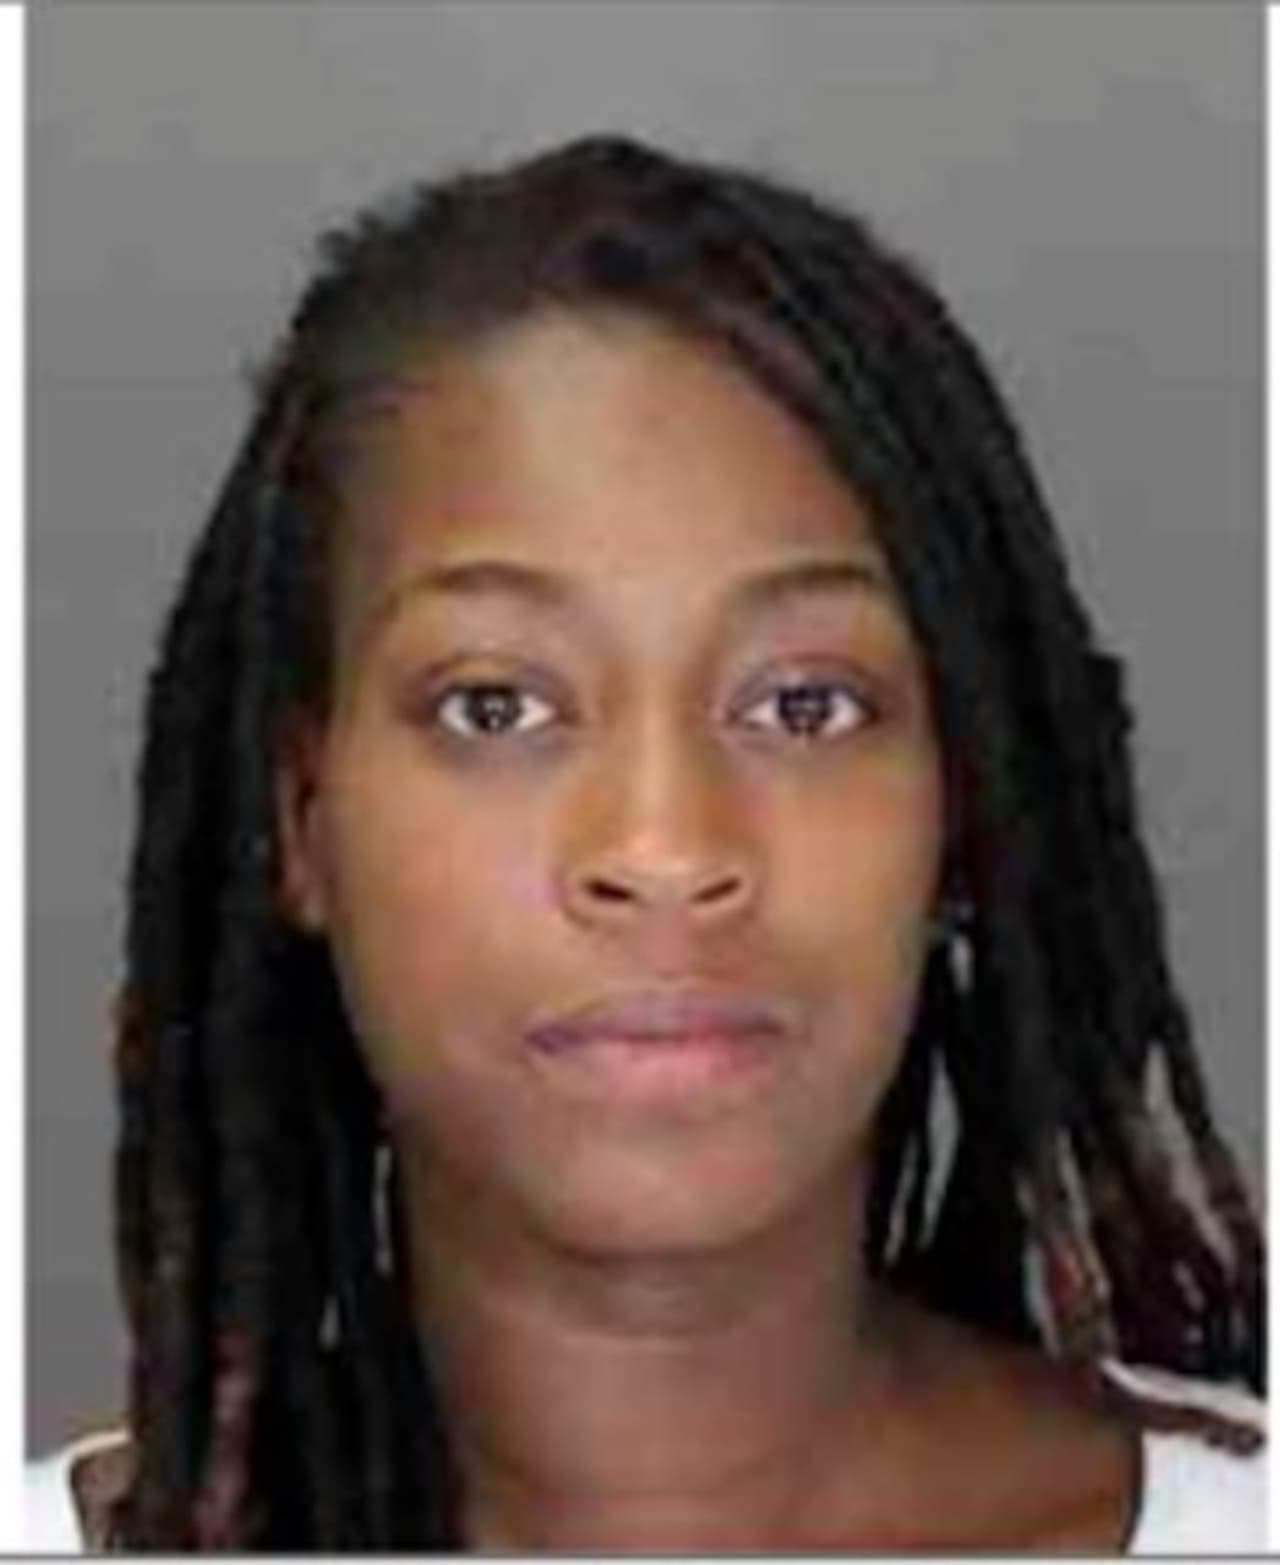 Chantelle Hudson is wanted for assault and endangering the welfare of a child.